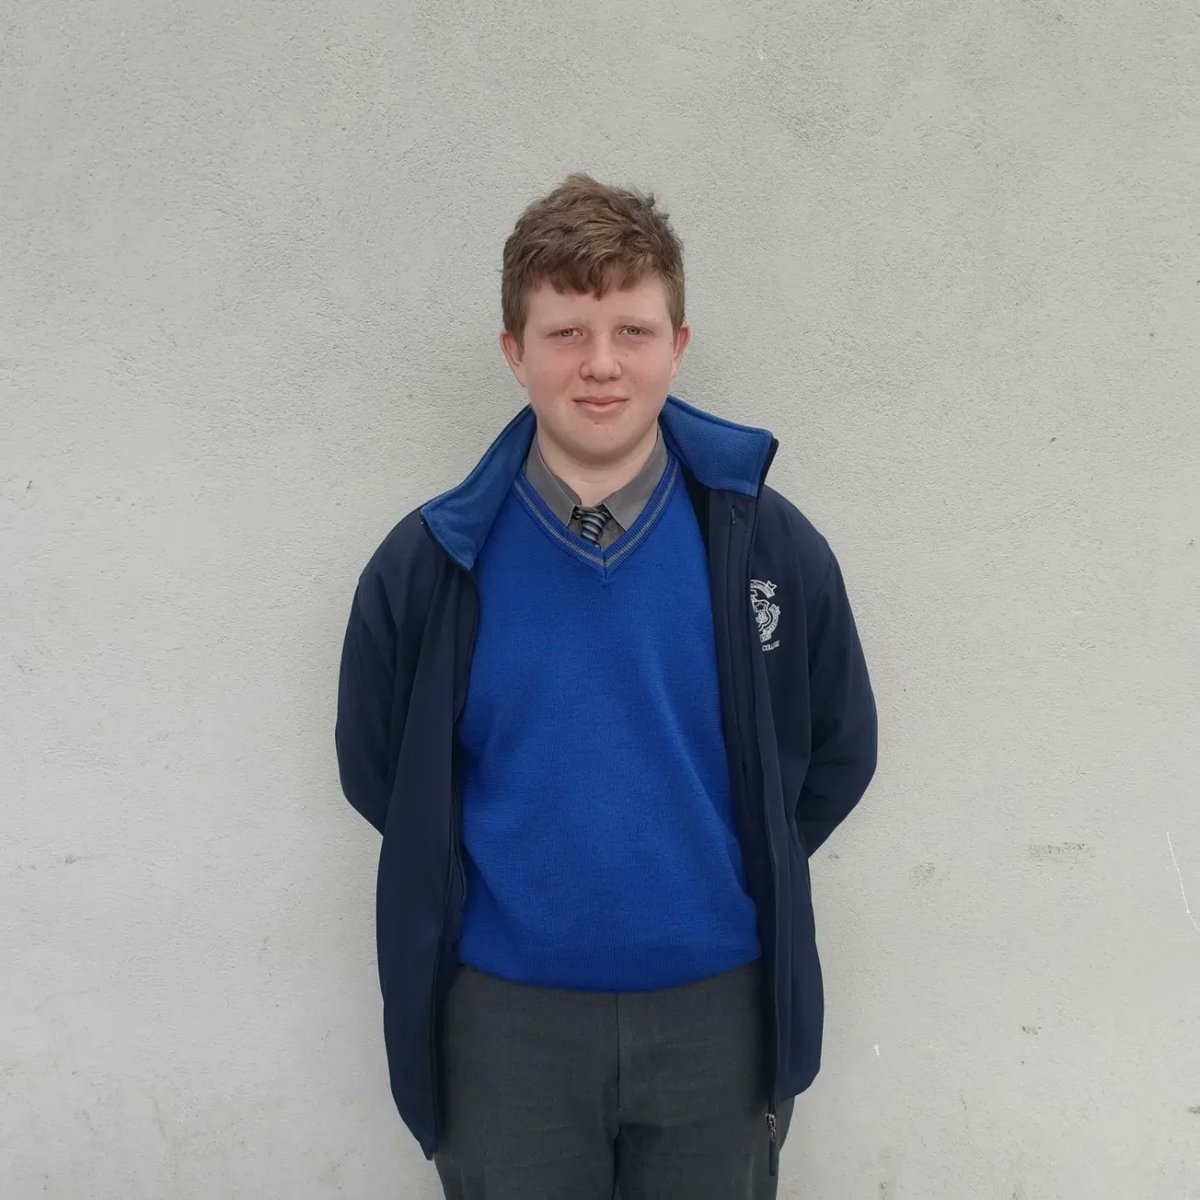 Congrats to Darragh Brennan in 2A3 who was crowned All Ireland Champion🥇 by the National Boxing Association in the National Stadium. 🥊🥊 Well done also to Joshua Crosby in 2A4 who won the silver medal🥈 in the U15 shot putt at the All Ireland Indoor Championship in Athlone.💪